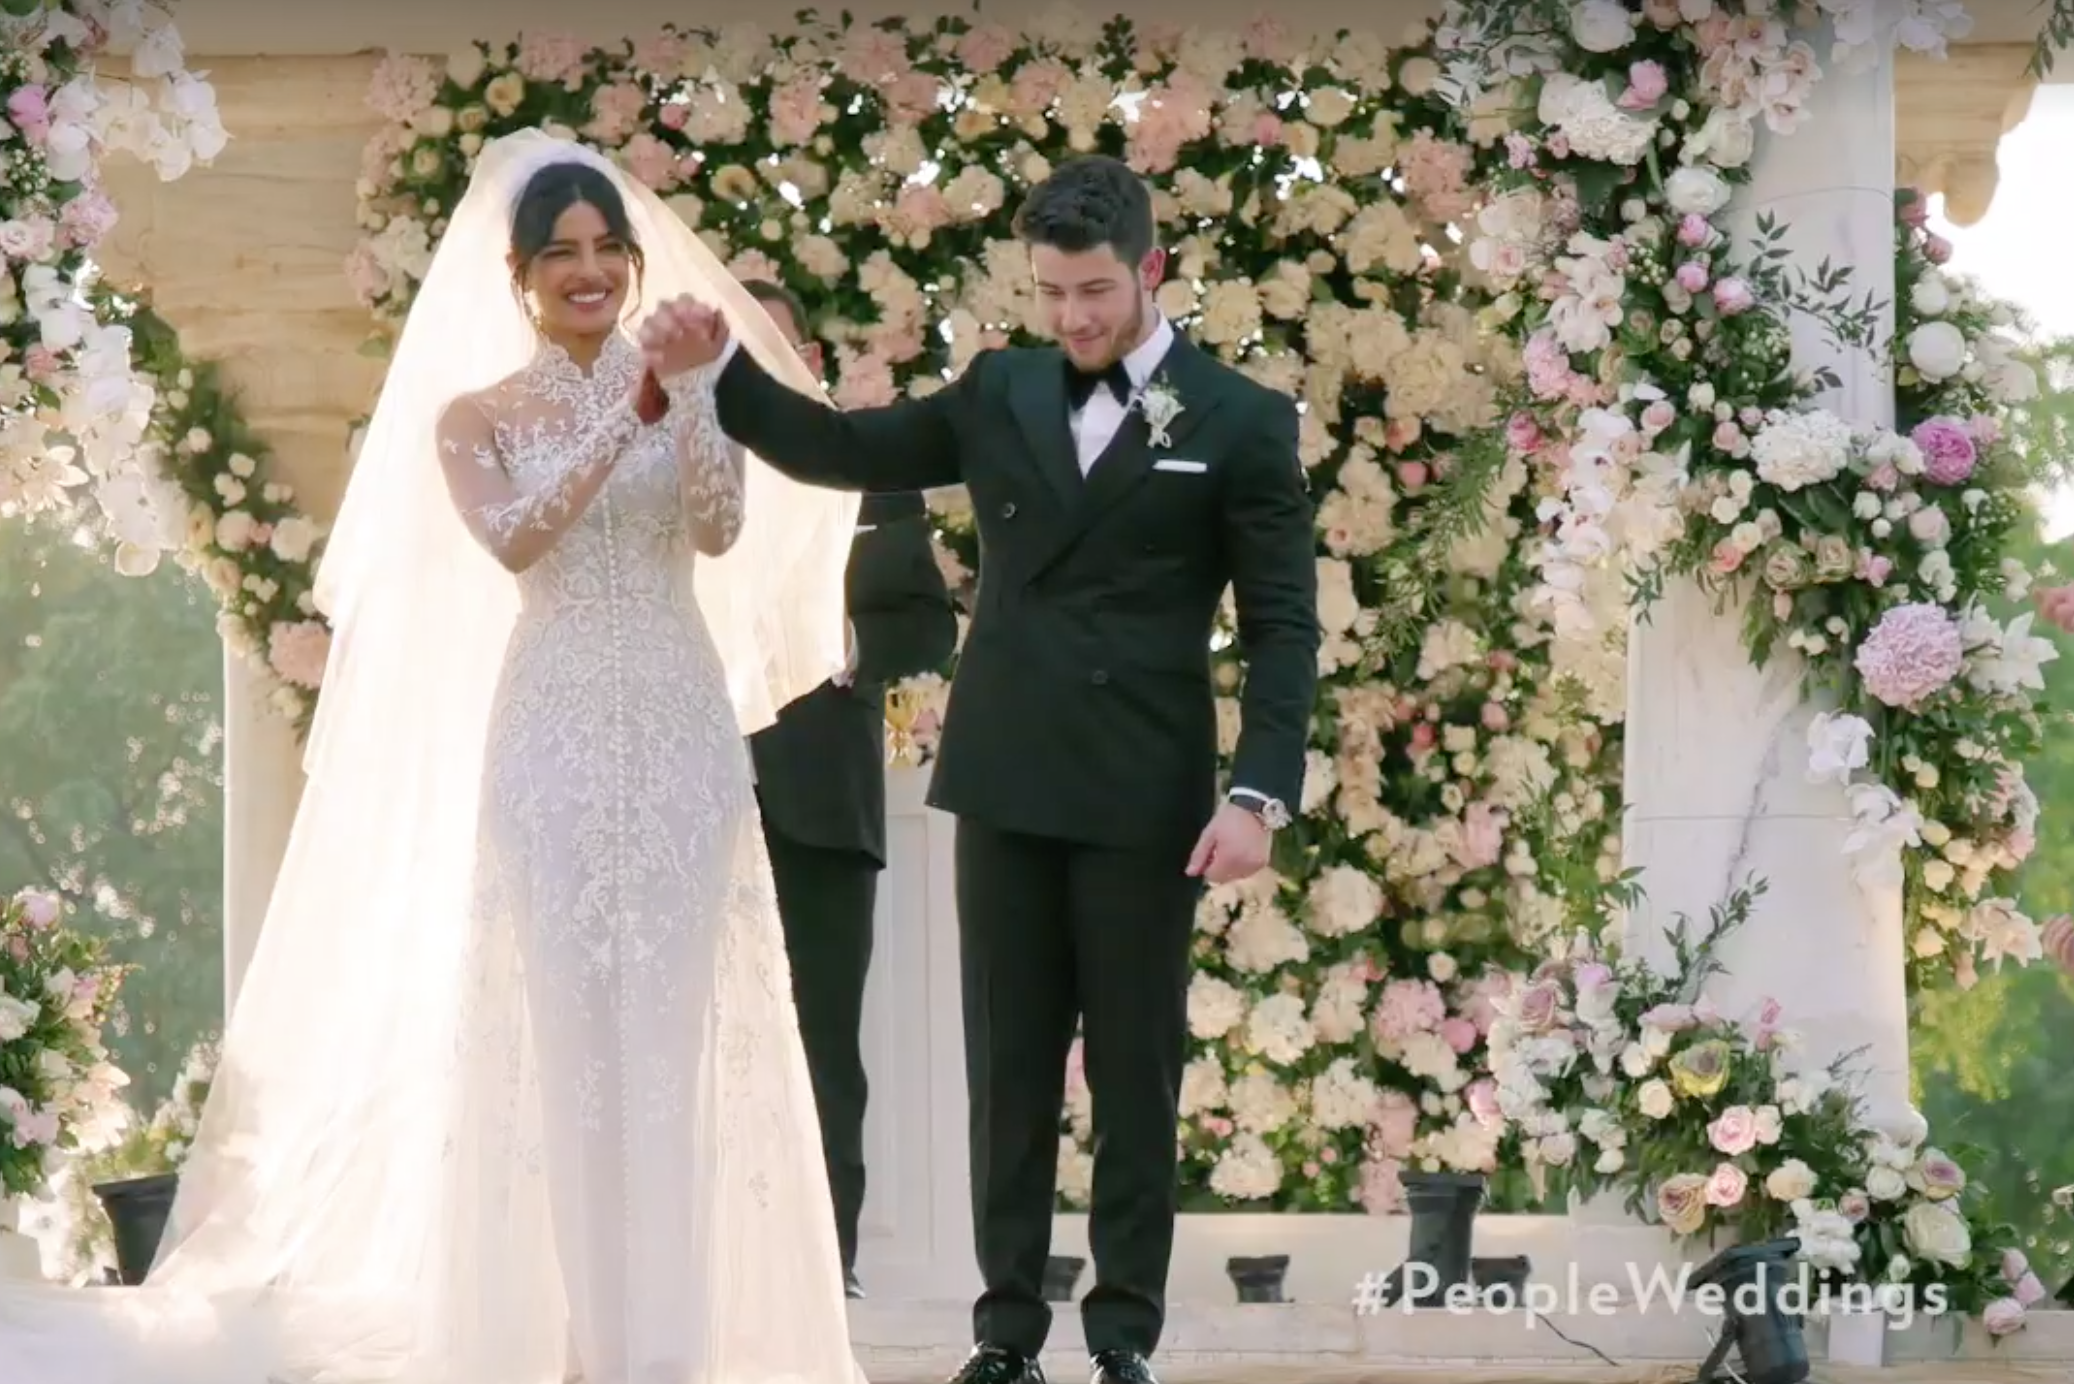 Priyanka Chopra, Nick Jonas share how her side of family cheered loudly  during 'sombre moment' at wedding. Watch